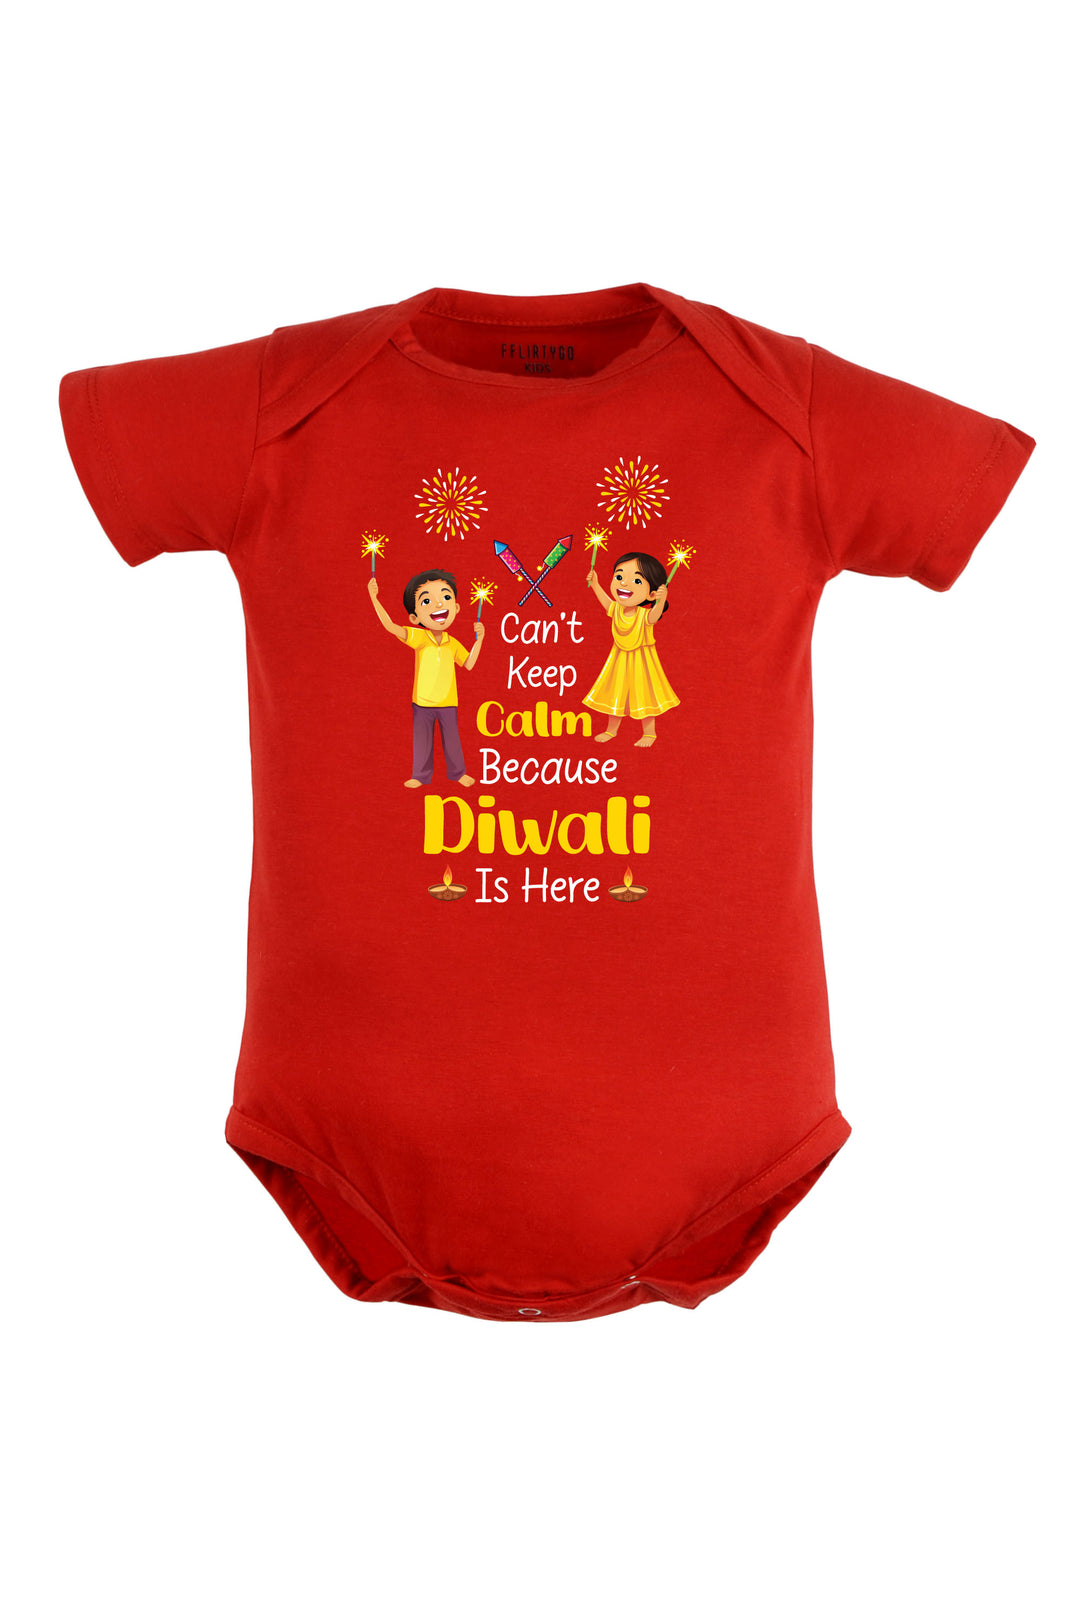 Can't Keep Calm Because Diwali Is Here Baby Romper | Onesies